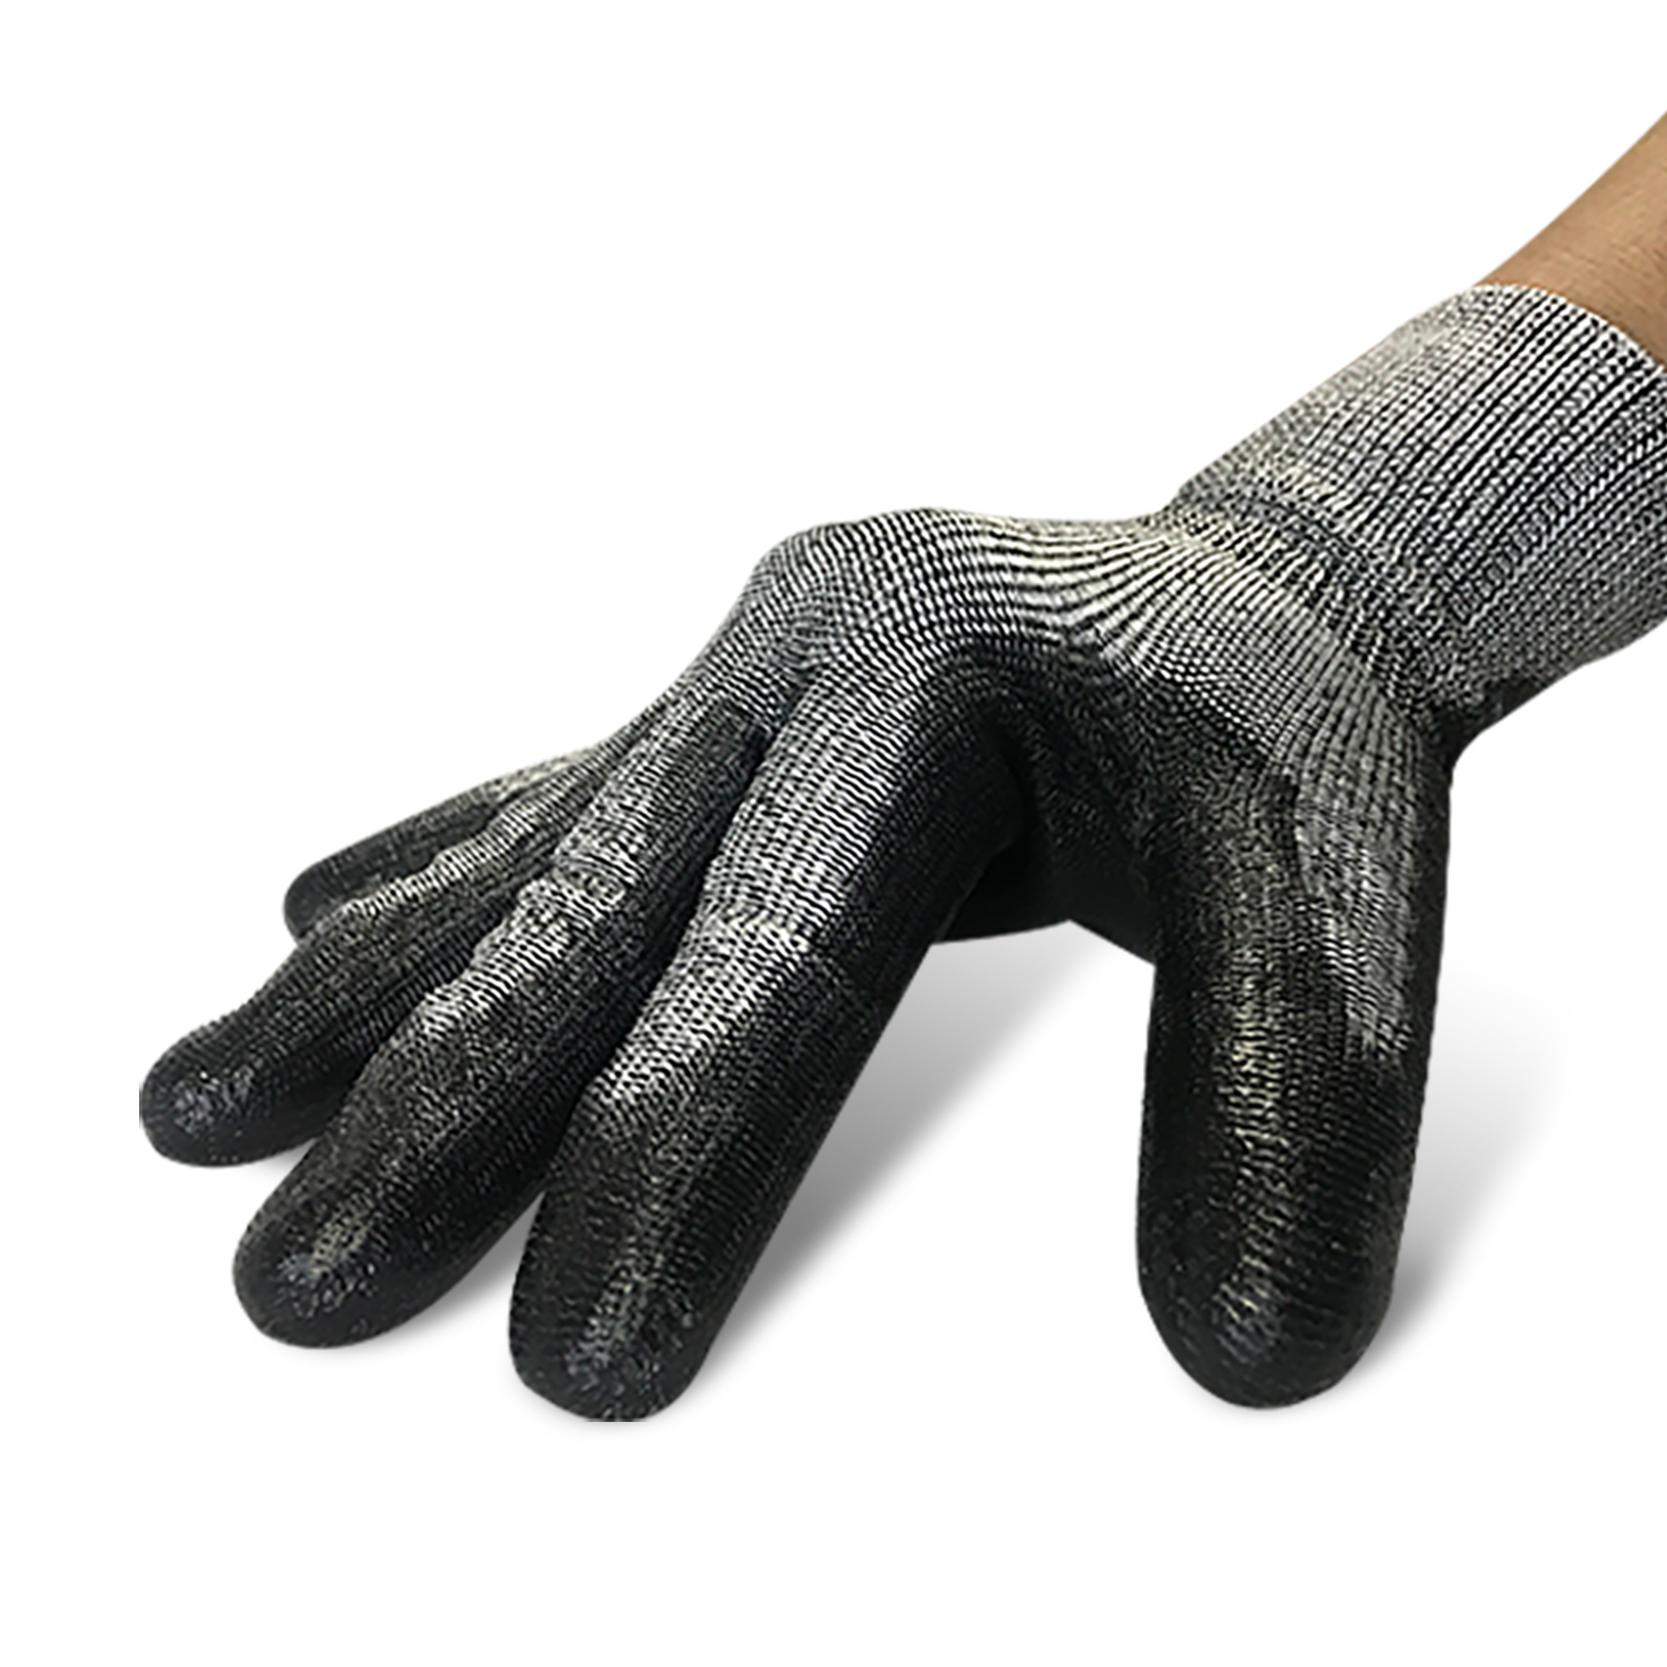 Hot Selling 13G Hppe+Glass Fibre+Steel Shell Nitrile Sandy Coated Gloves Featured Image